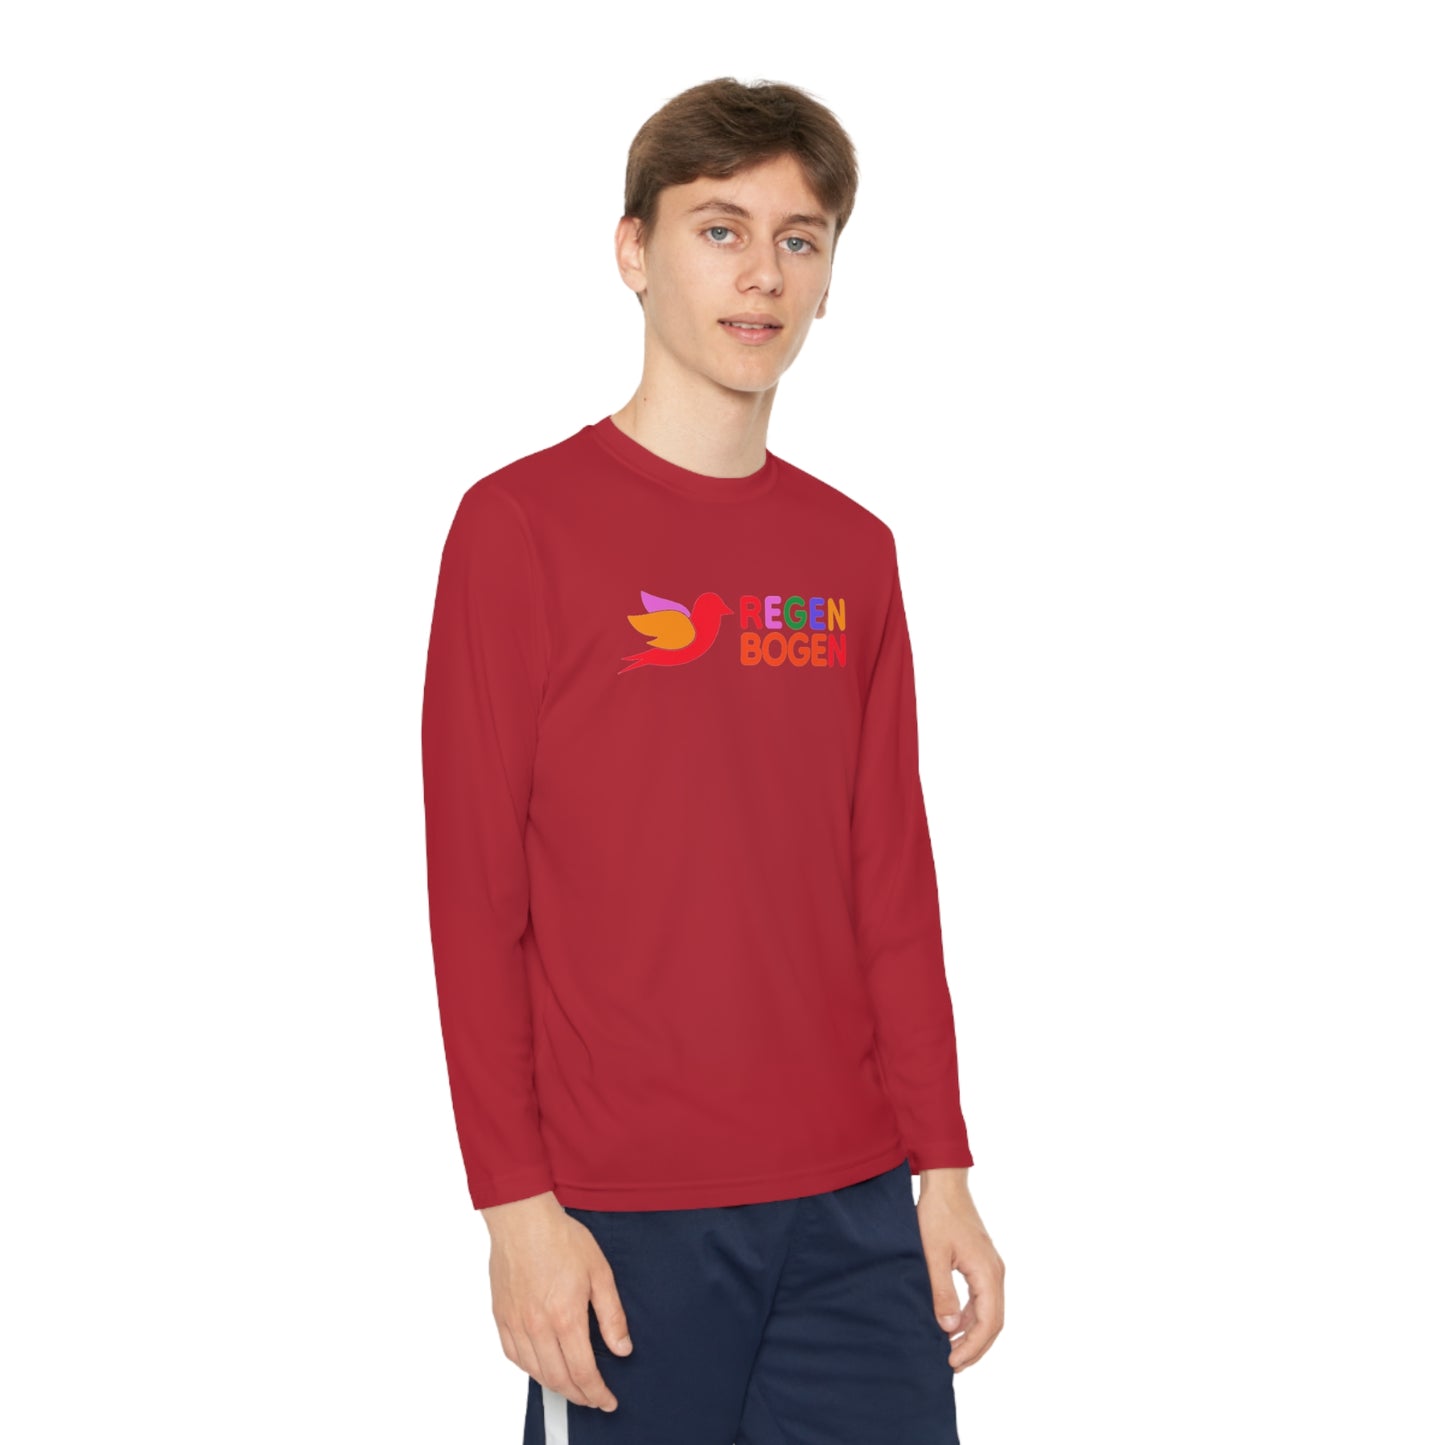 Regenbogen Stacked Youth Long Sleeve Competitor Tee (6 colors)